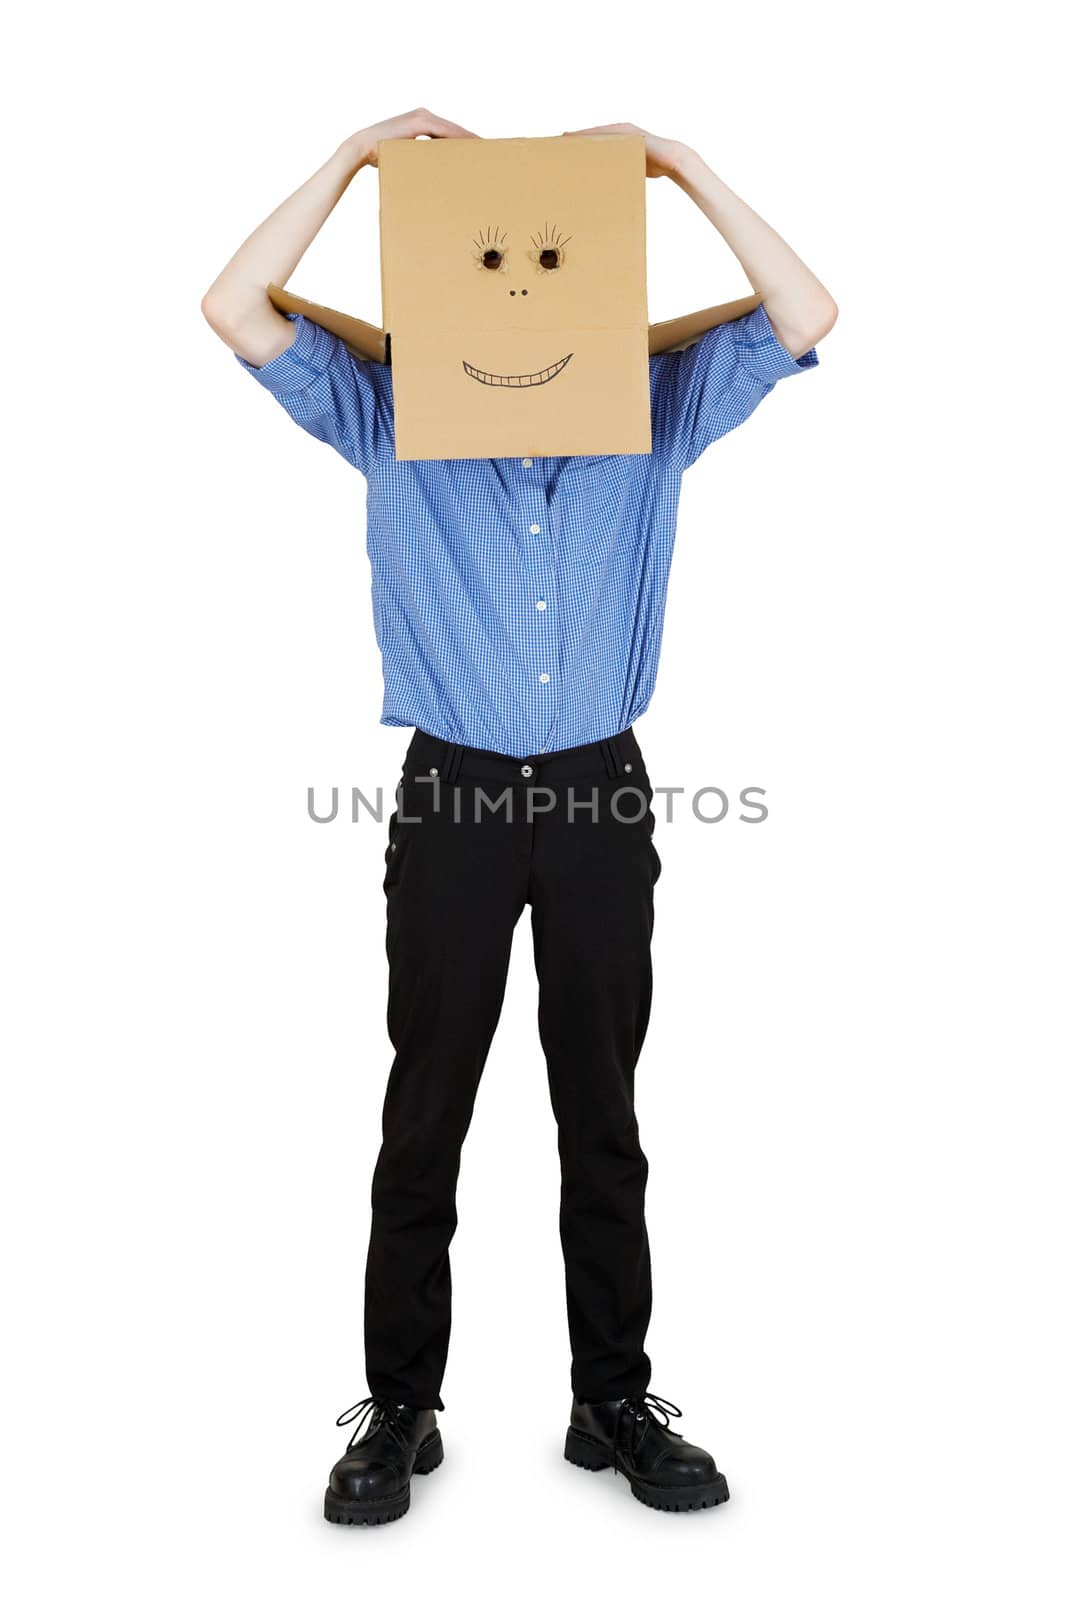 Funny man put on his head a box by pzaxe